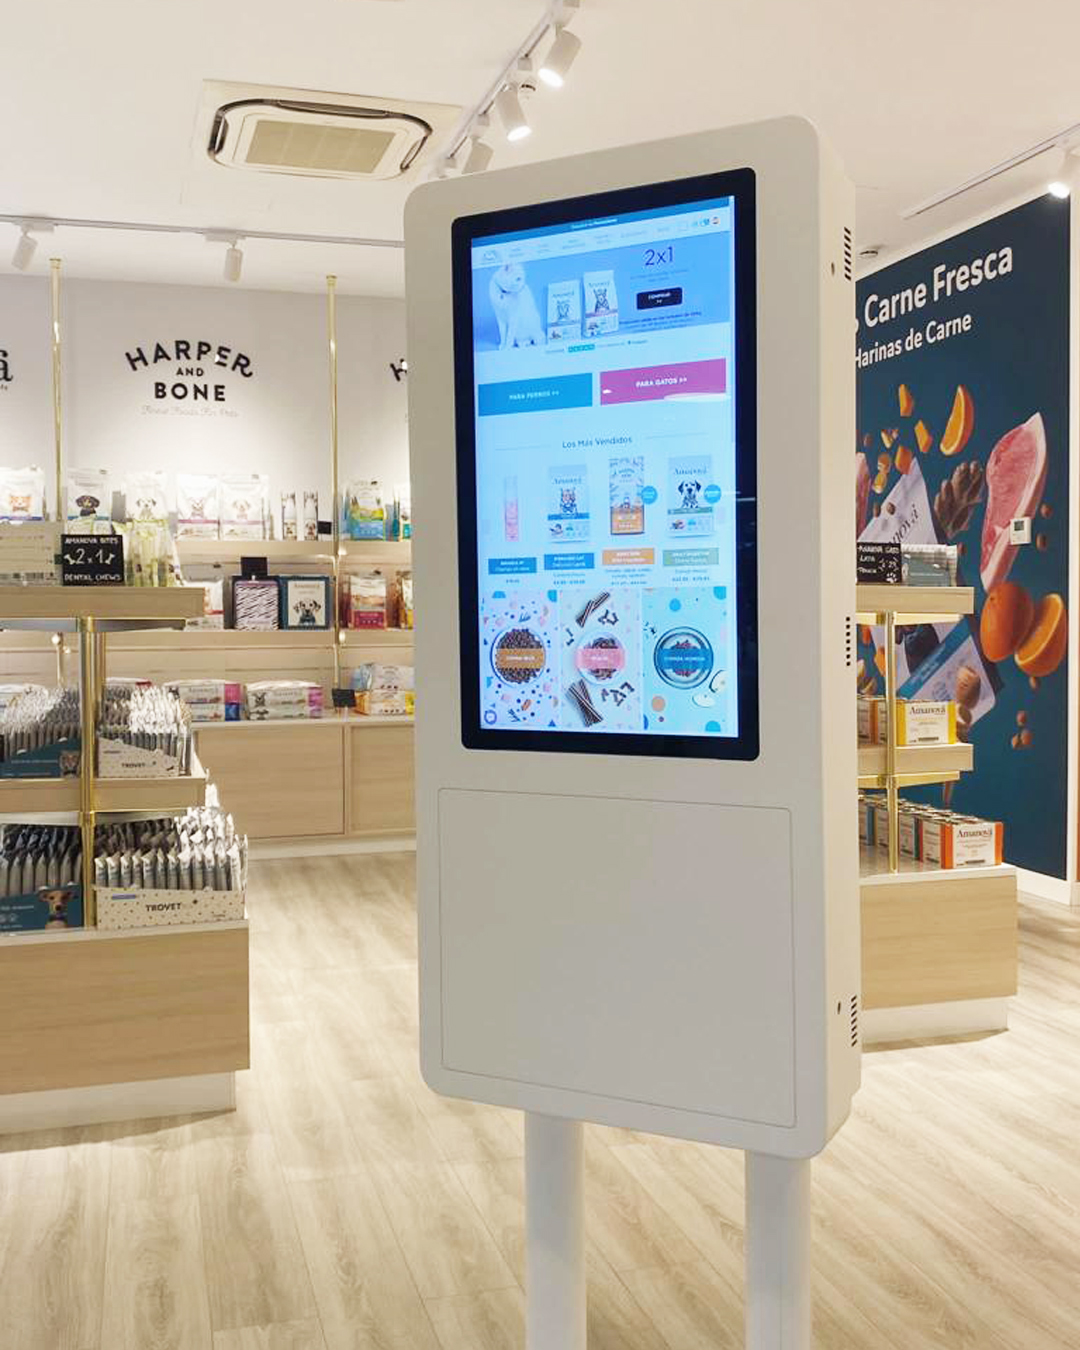 The Only Fresh Store in Madrid, invests in Interactive Technology by PARTTEAM & OEMKIOSKS with Media QSR Multimedia Kiosk